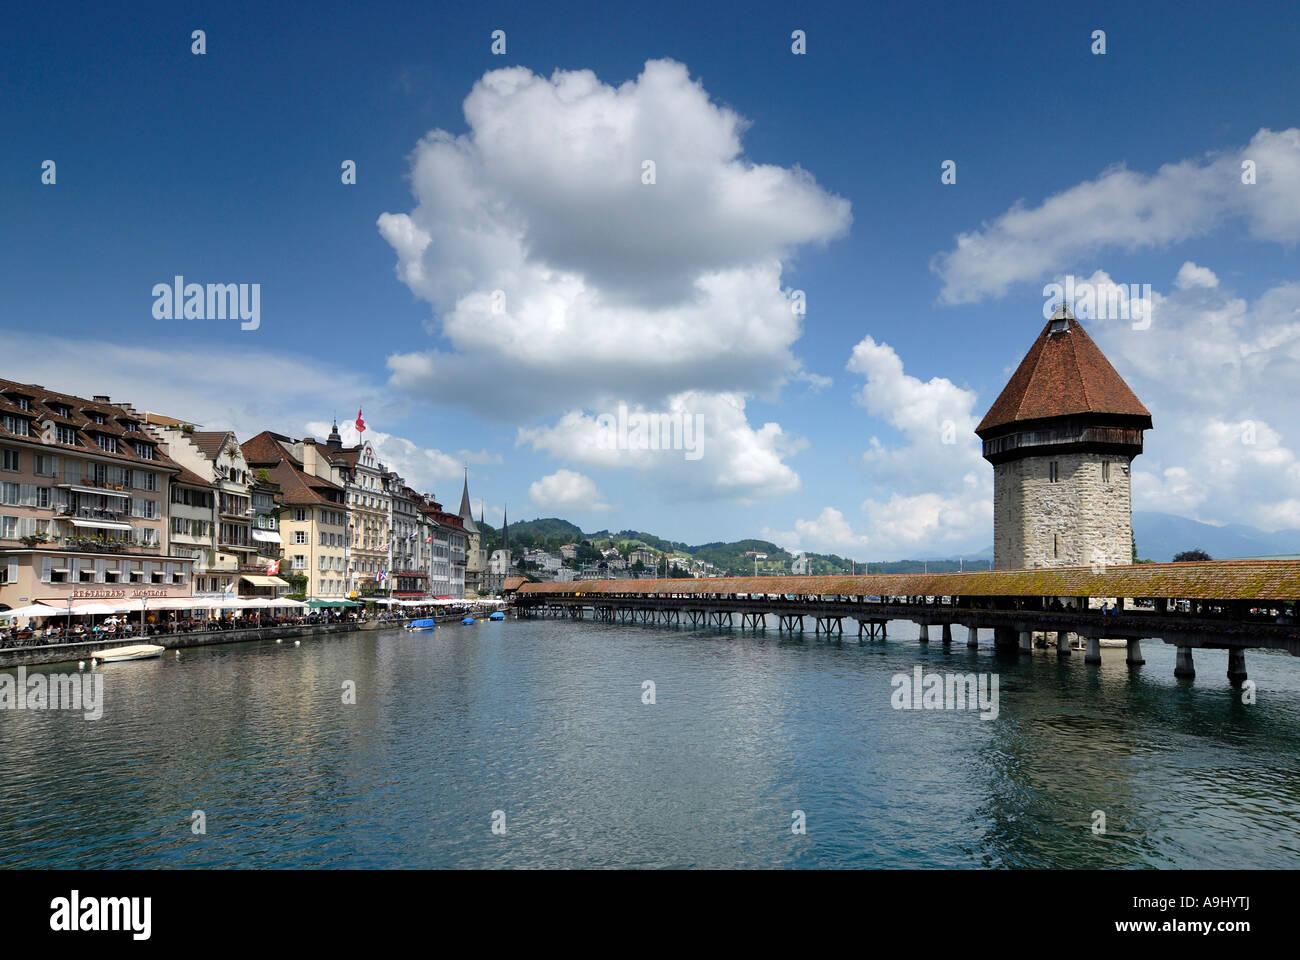 Lucerne - the chappel's Bridge an old part of town - Switzerland, Europe. Stock Photo